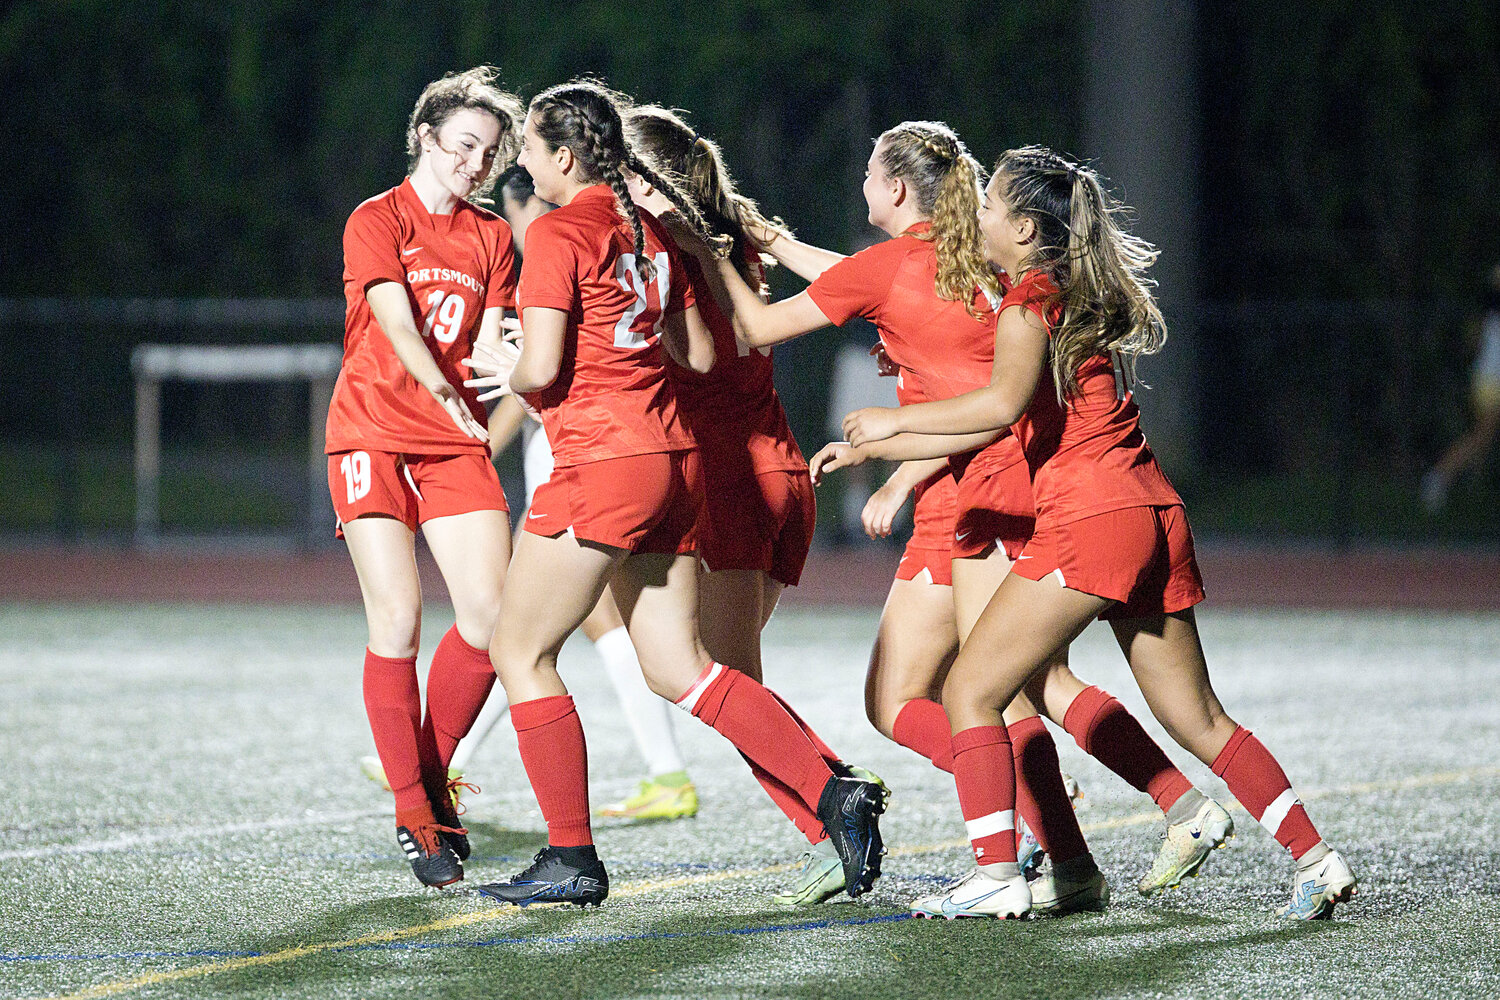 The Patriots celebrate a goal scored by Kaelyn Mahoney late in the first half of Tuesday’s home game against North Smithfield. Portsmouth won, 2-0.